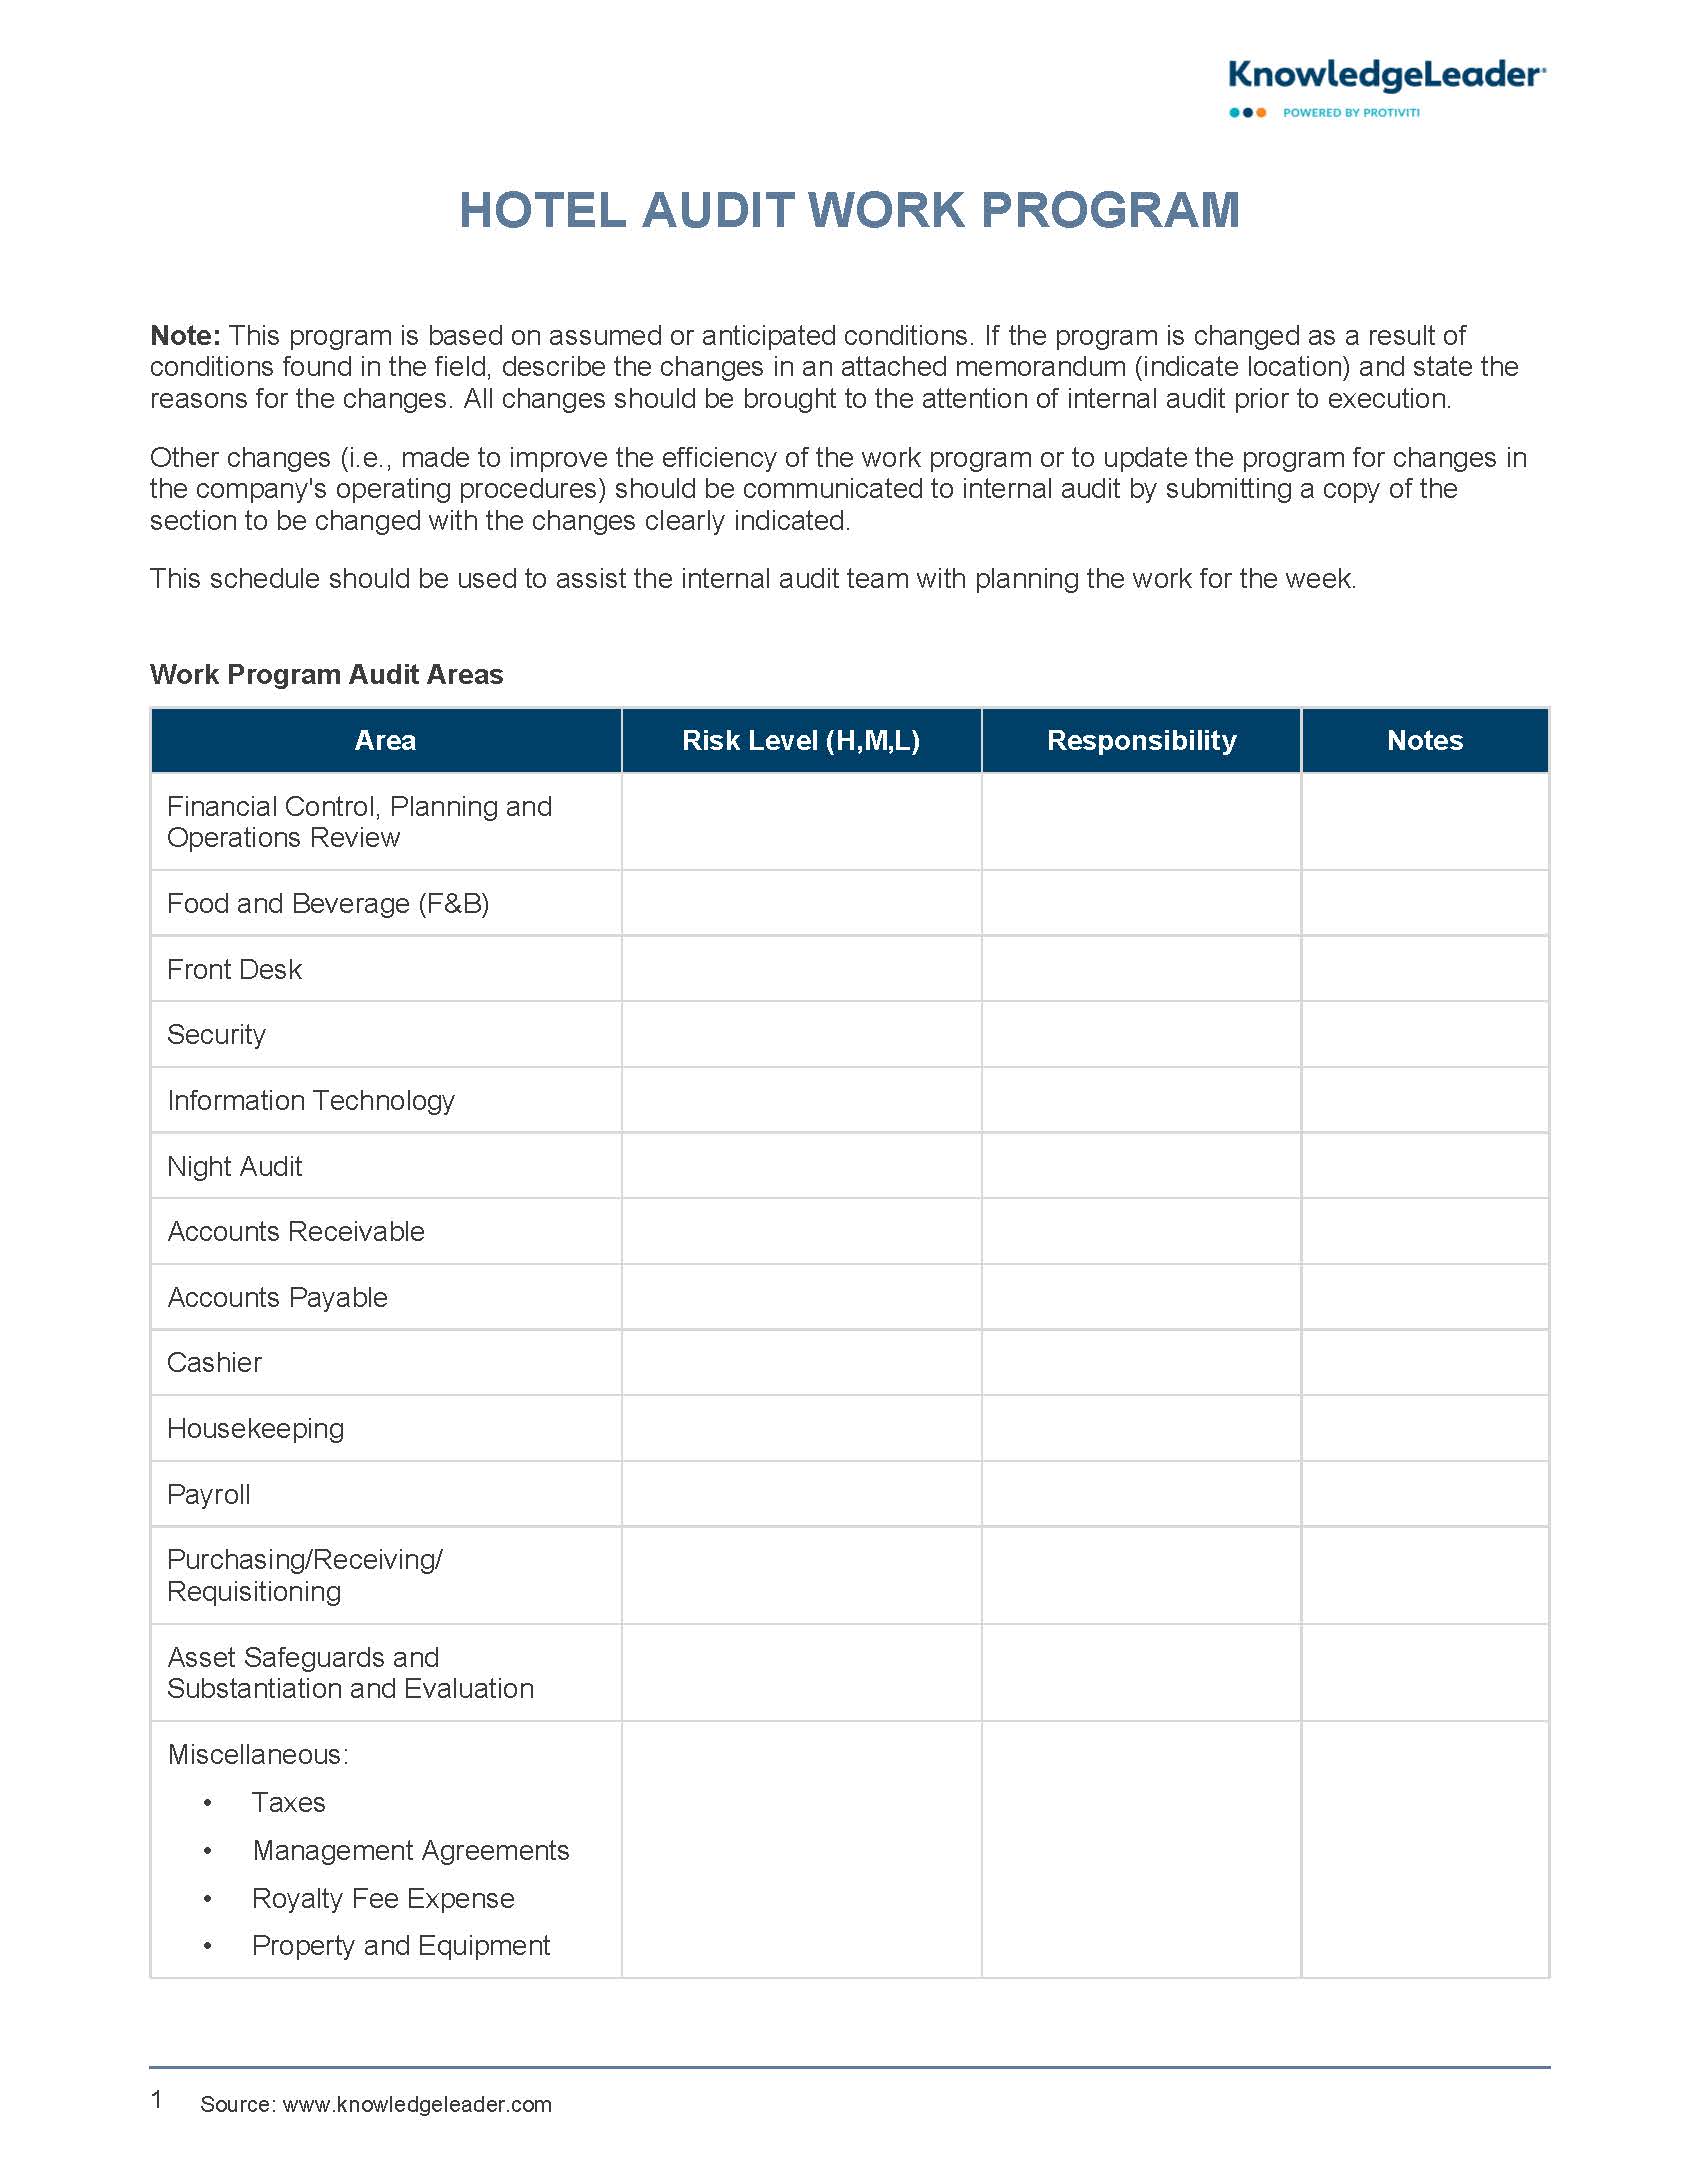 Screenshot of the first page of Hotel Audit Work Program